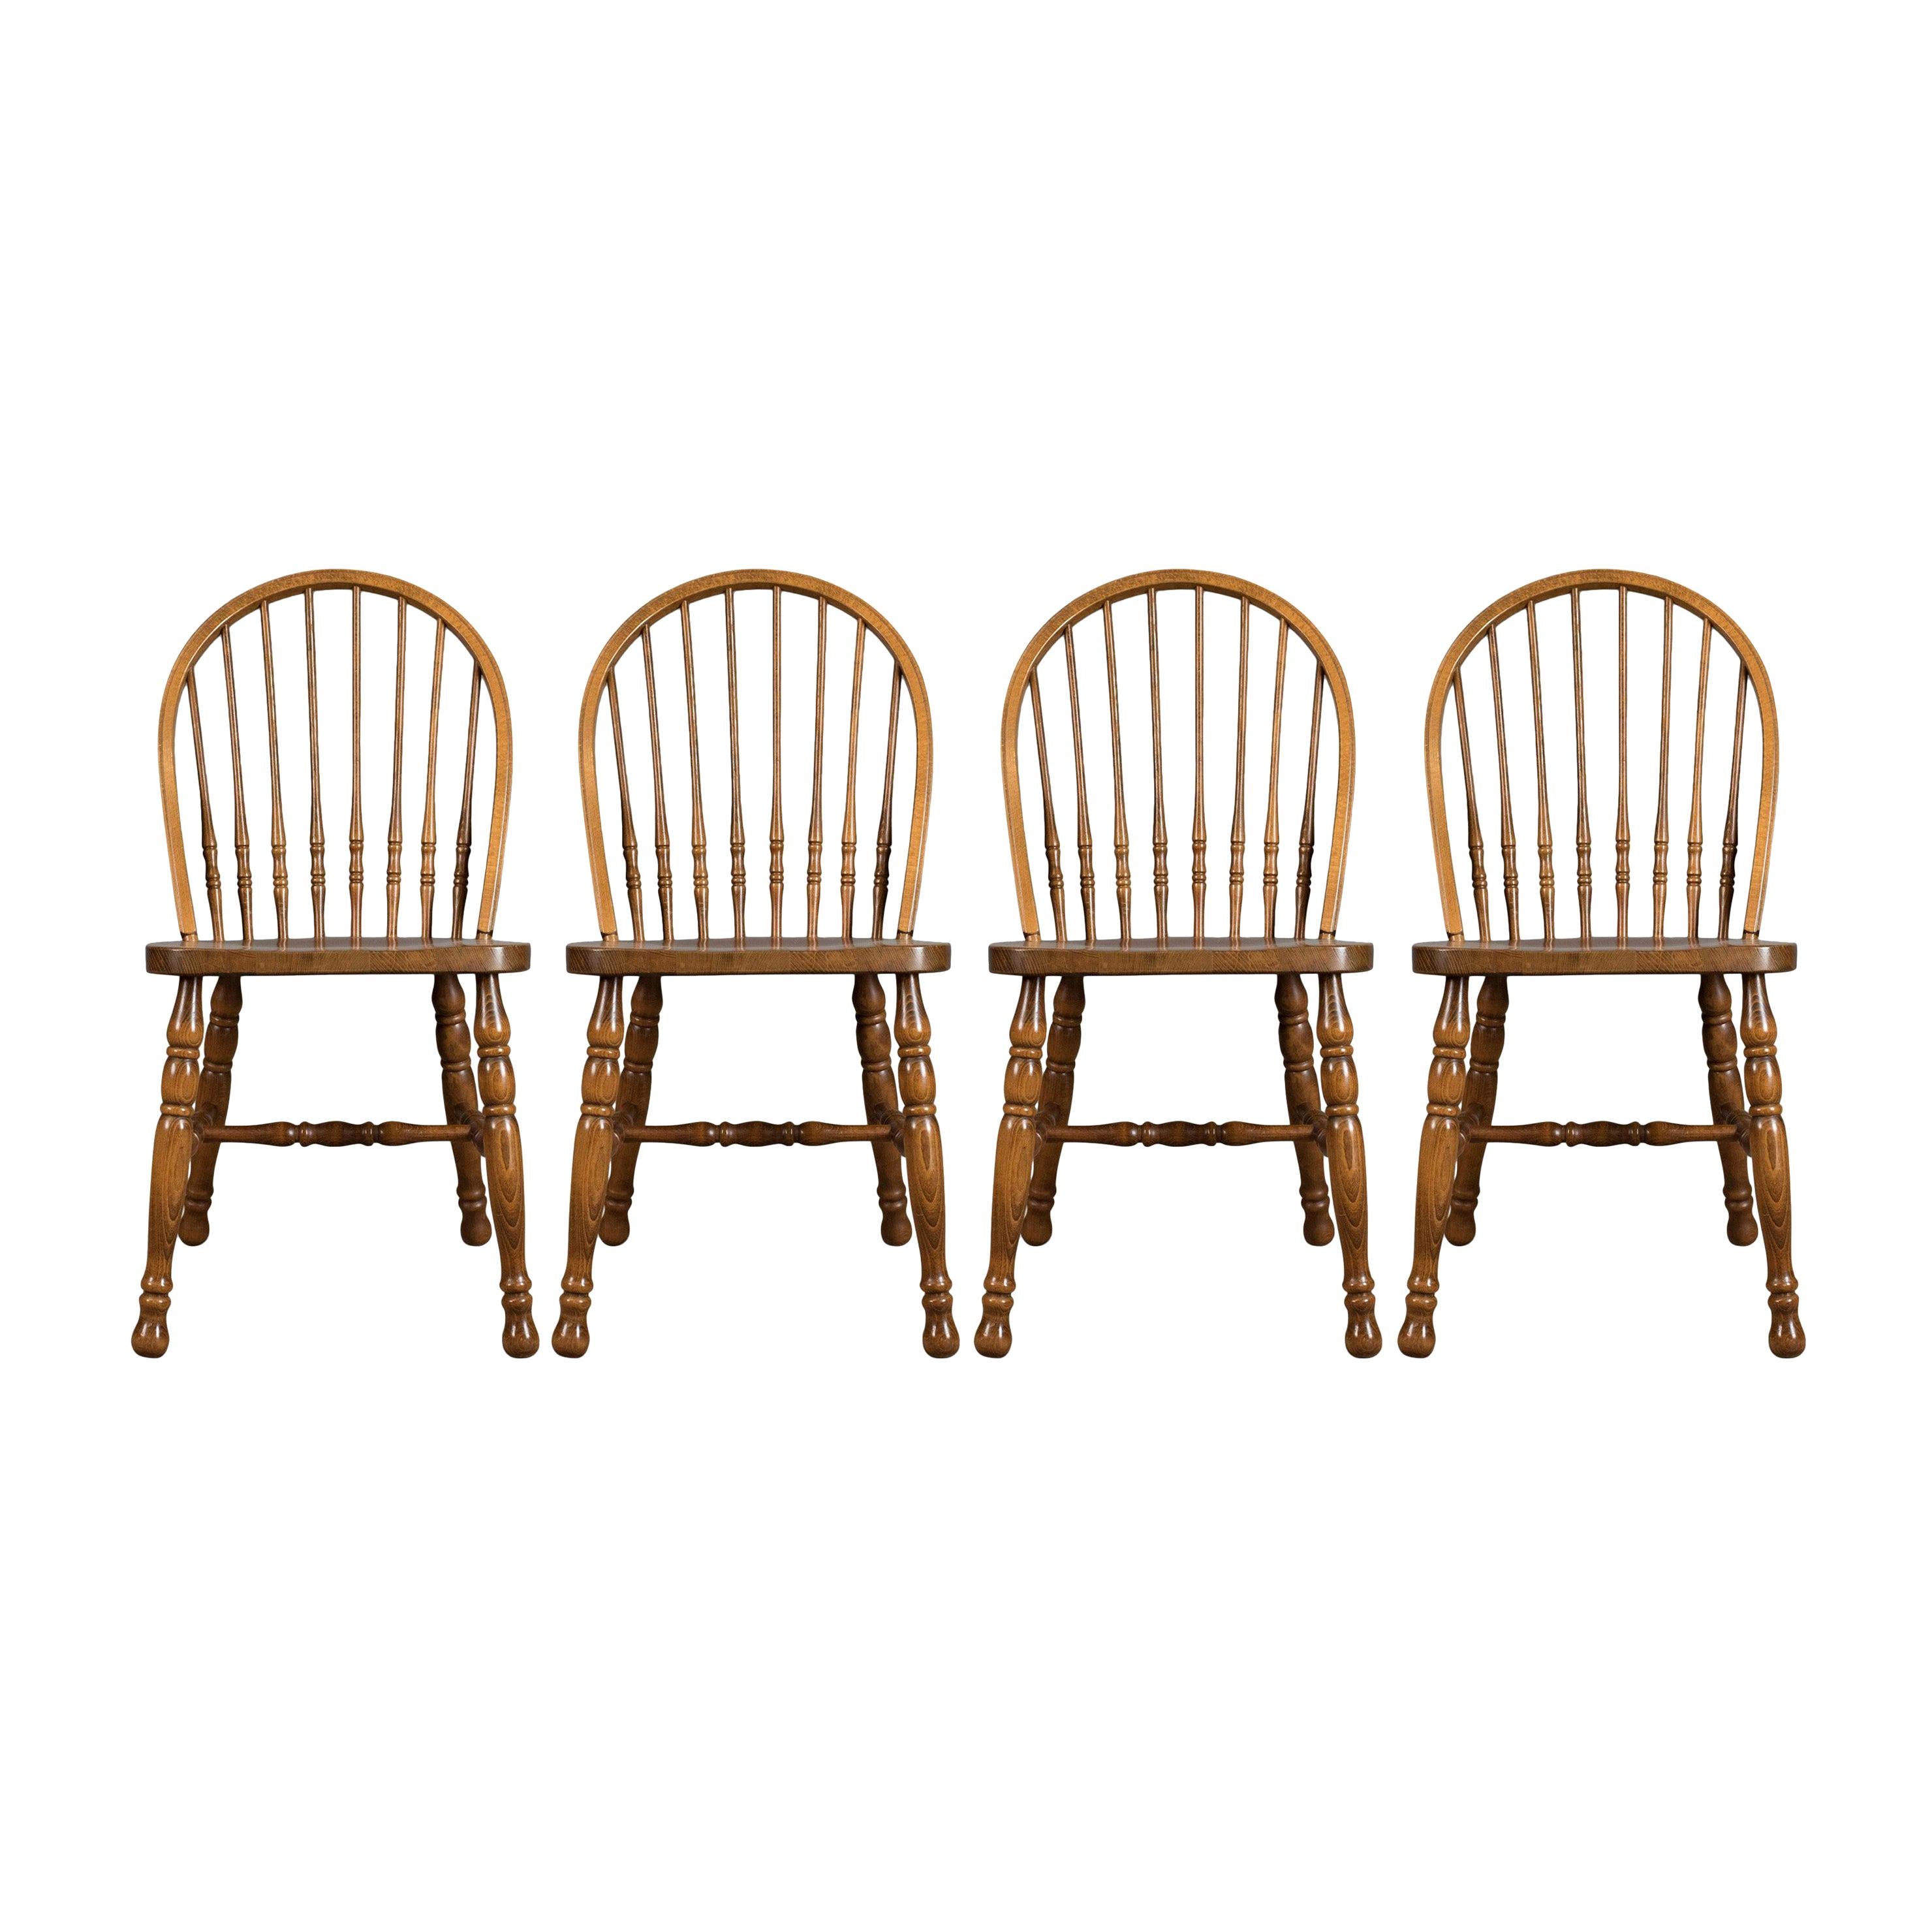 Set of Four Dining Chairs, French Windsor Hoop Stick-Back, Beech, 20th Century